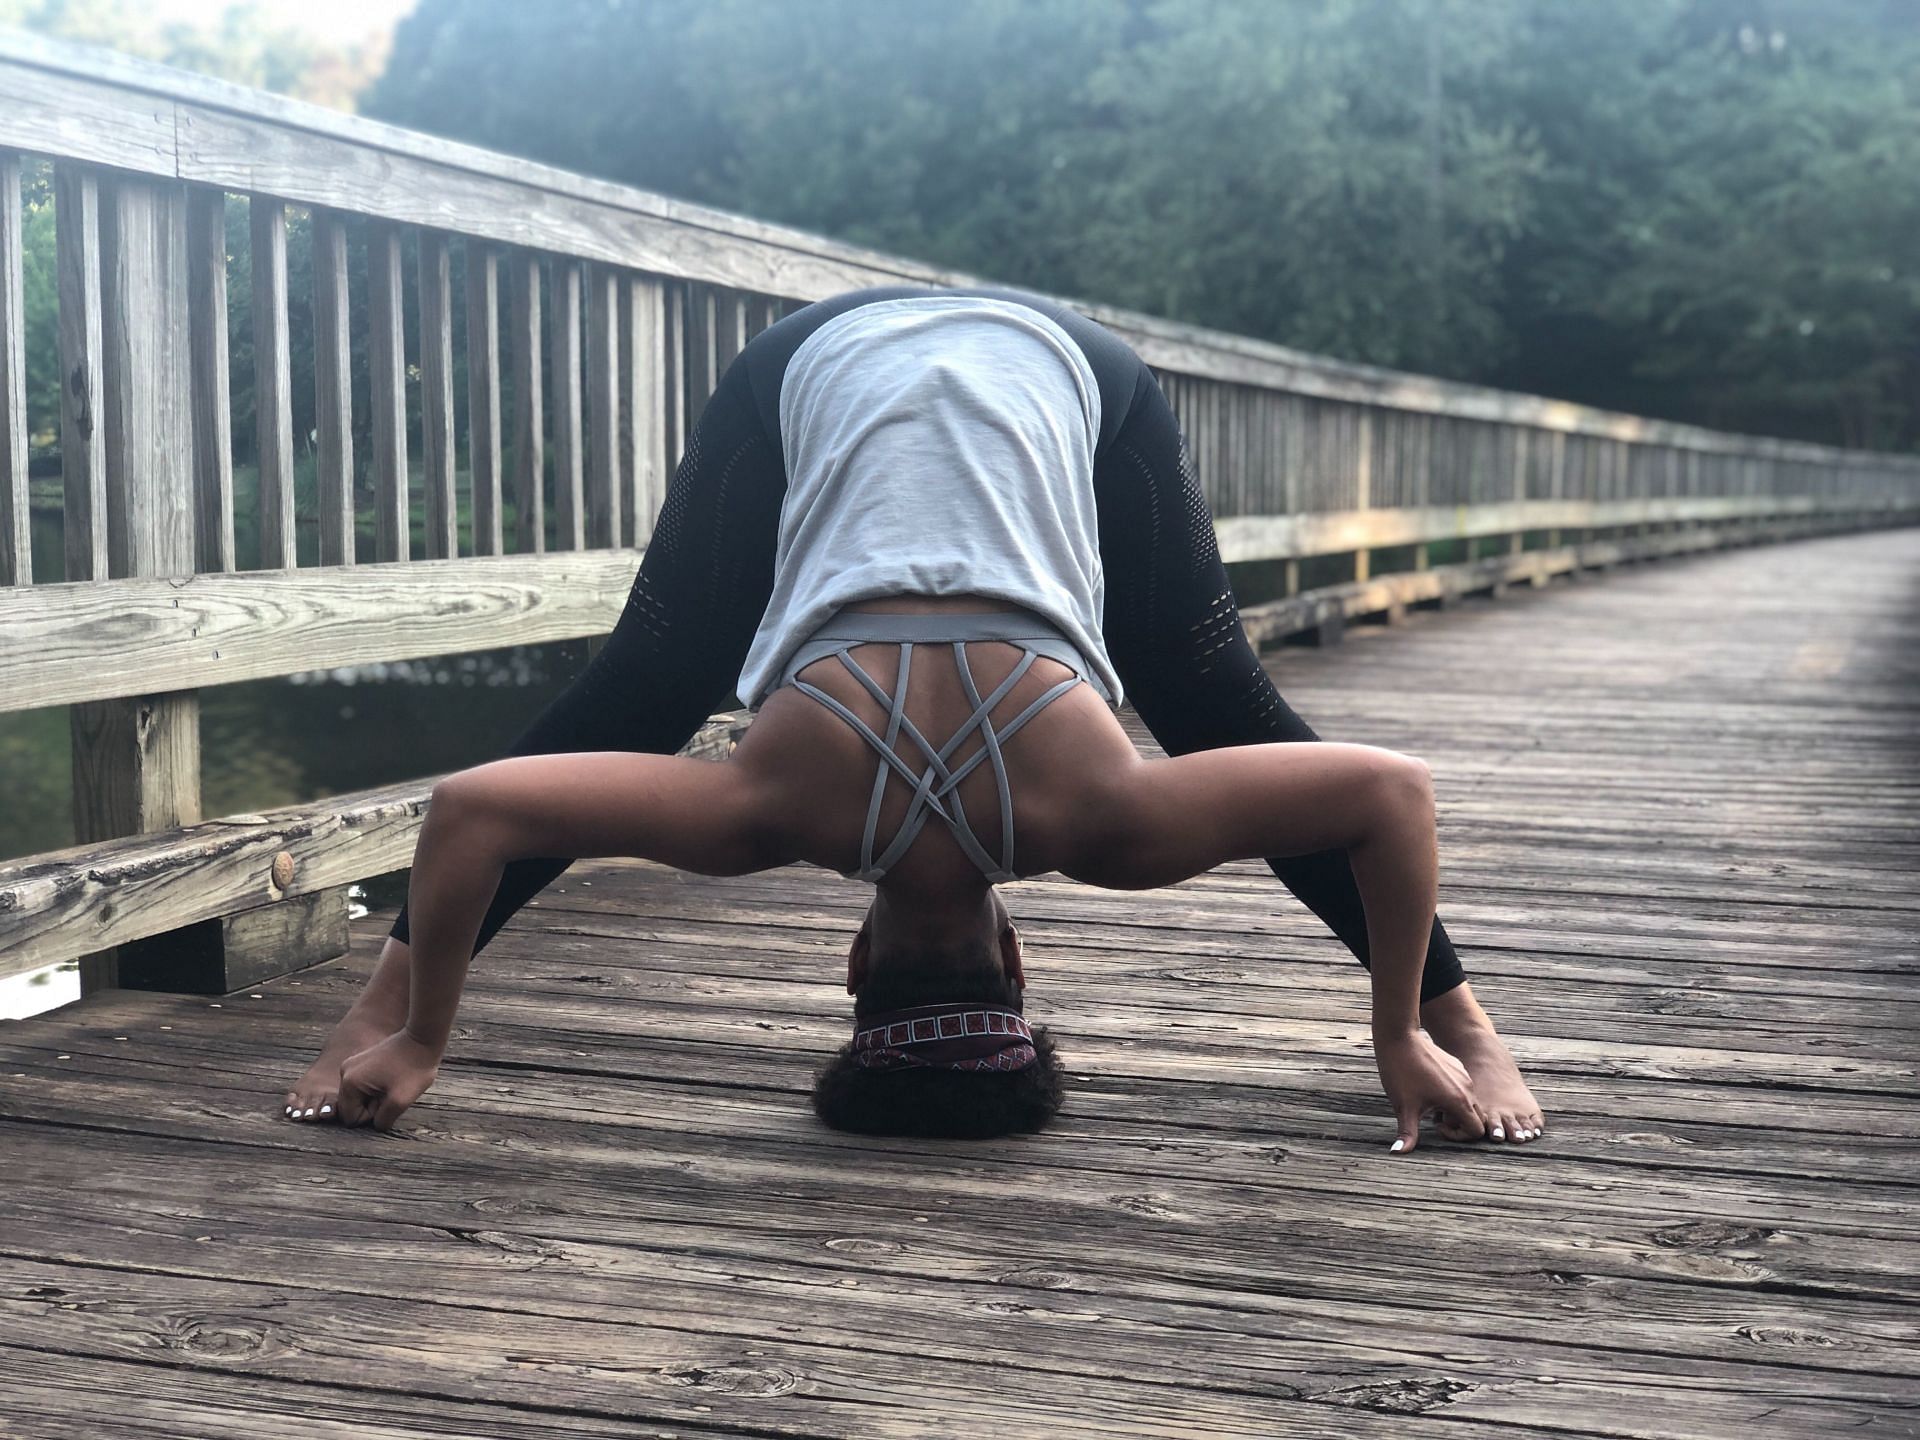 Lower back exercises play an important role in strengthening your back as well as alleviating back pain. (Image via Unsplash/ Liveology Yoga Magazine)